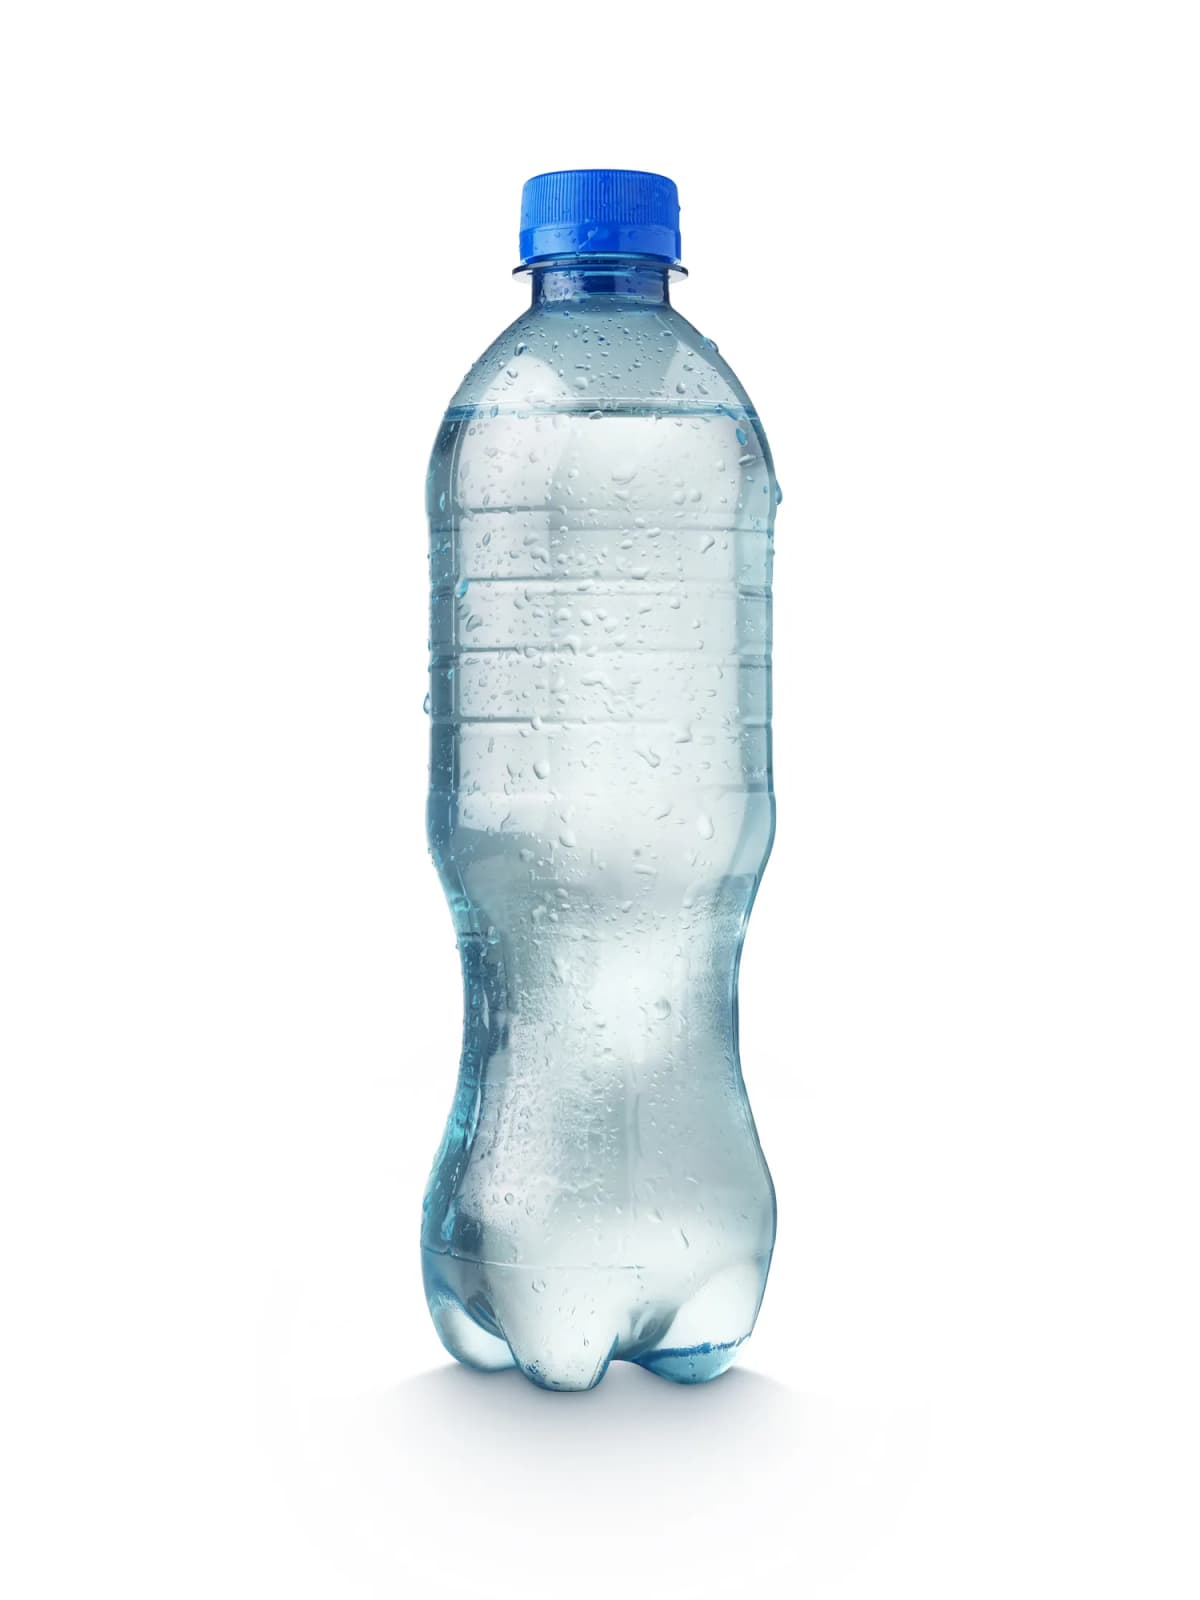 A plastic water bottle against a white background